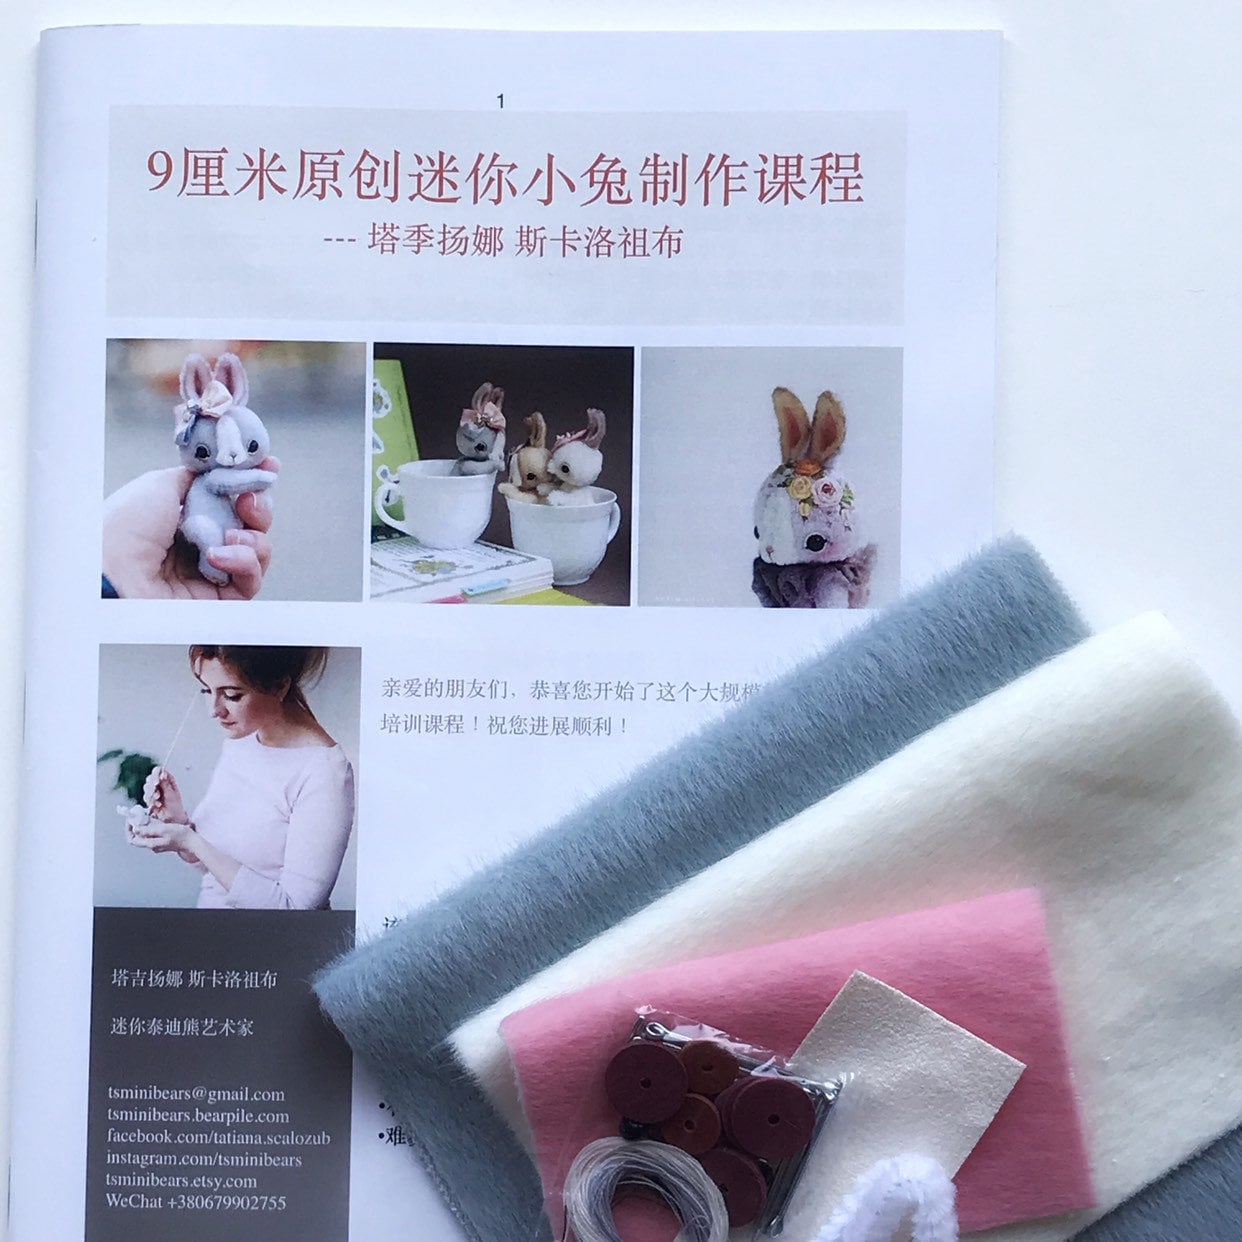 Bunny - Complete sewing KIT + pattern "Bunny" for making miniature bear, DIY a teddy bear, how to sew a teddy rabbit, mini toy pattern